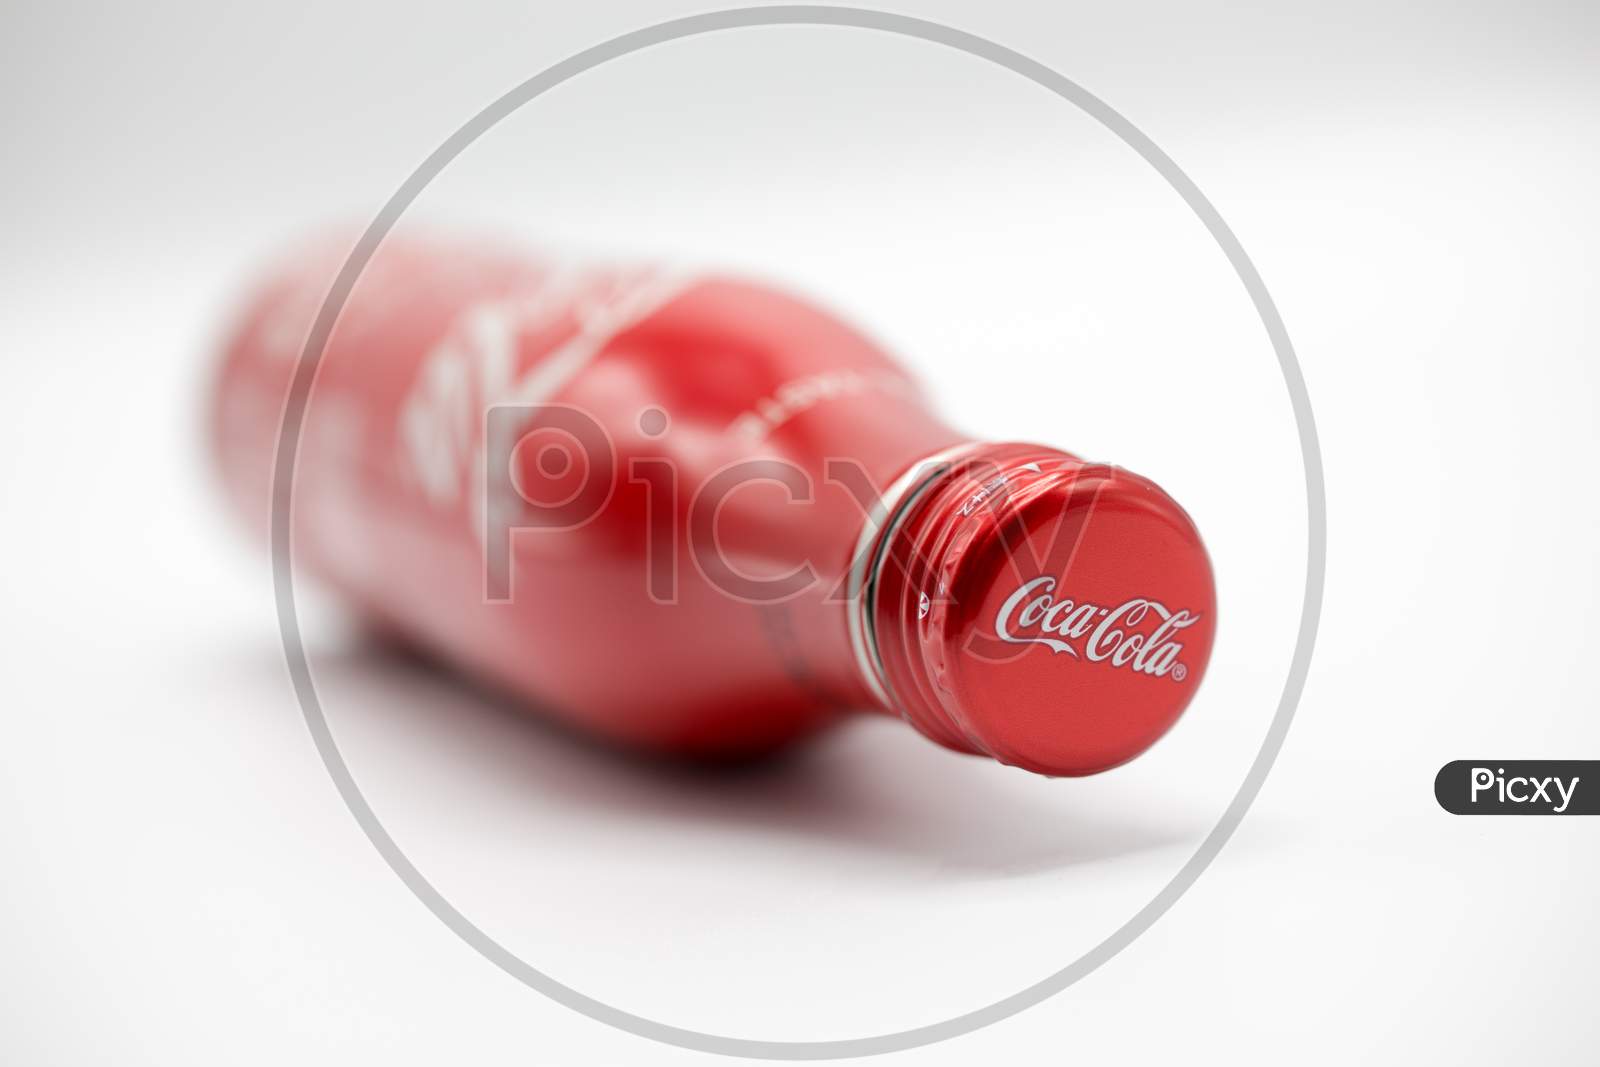 Coca-Cola Cool Drink Bottle on White Background